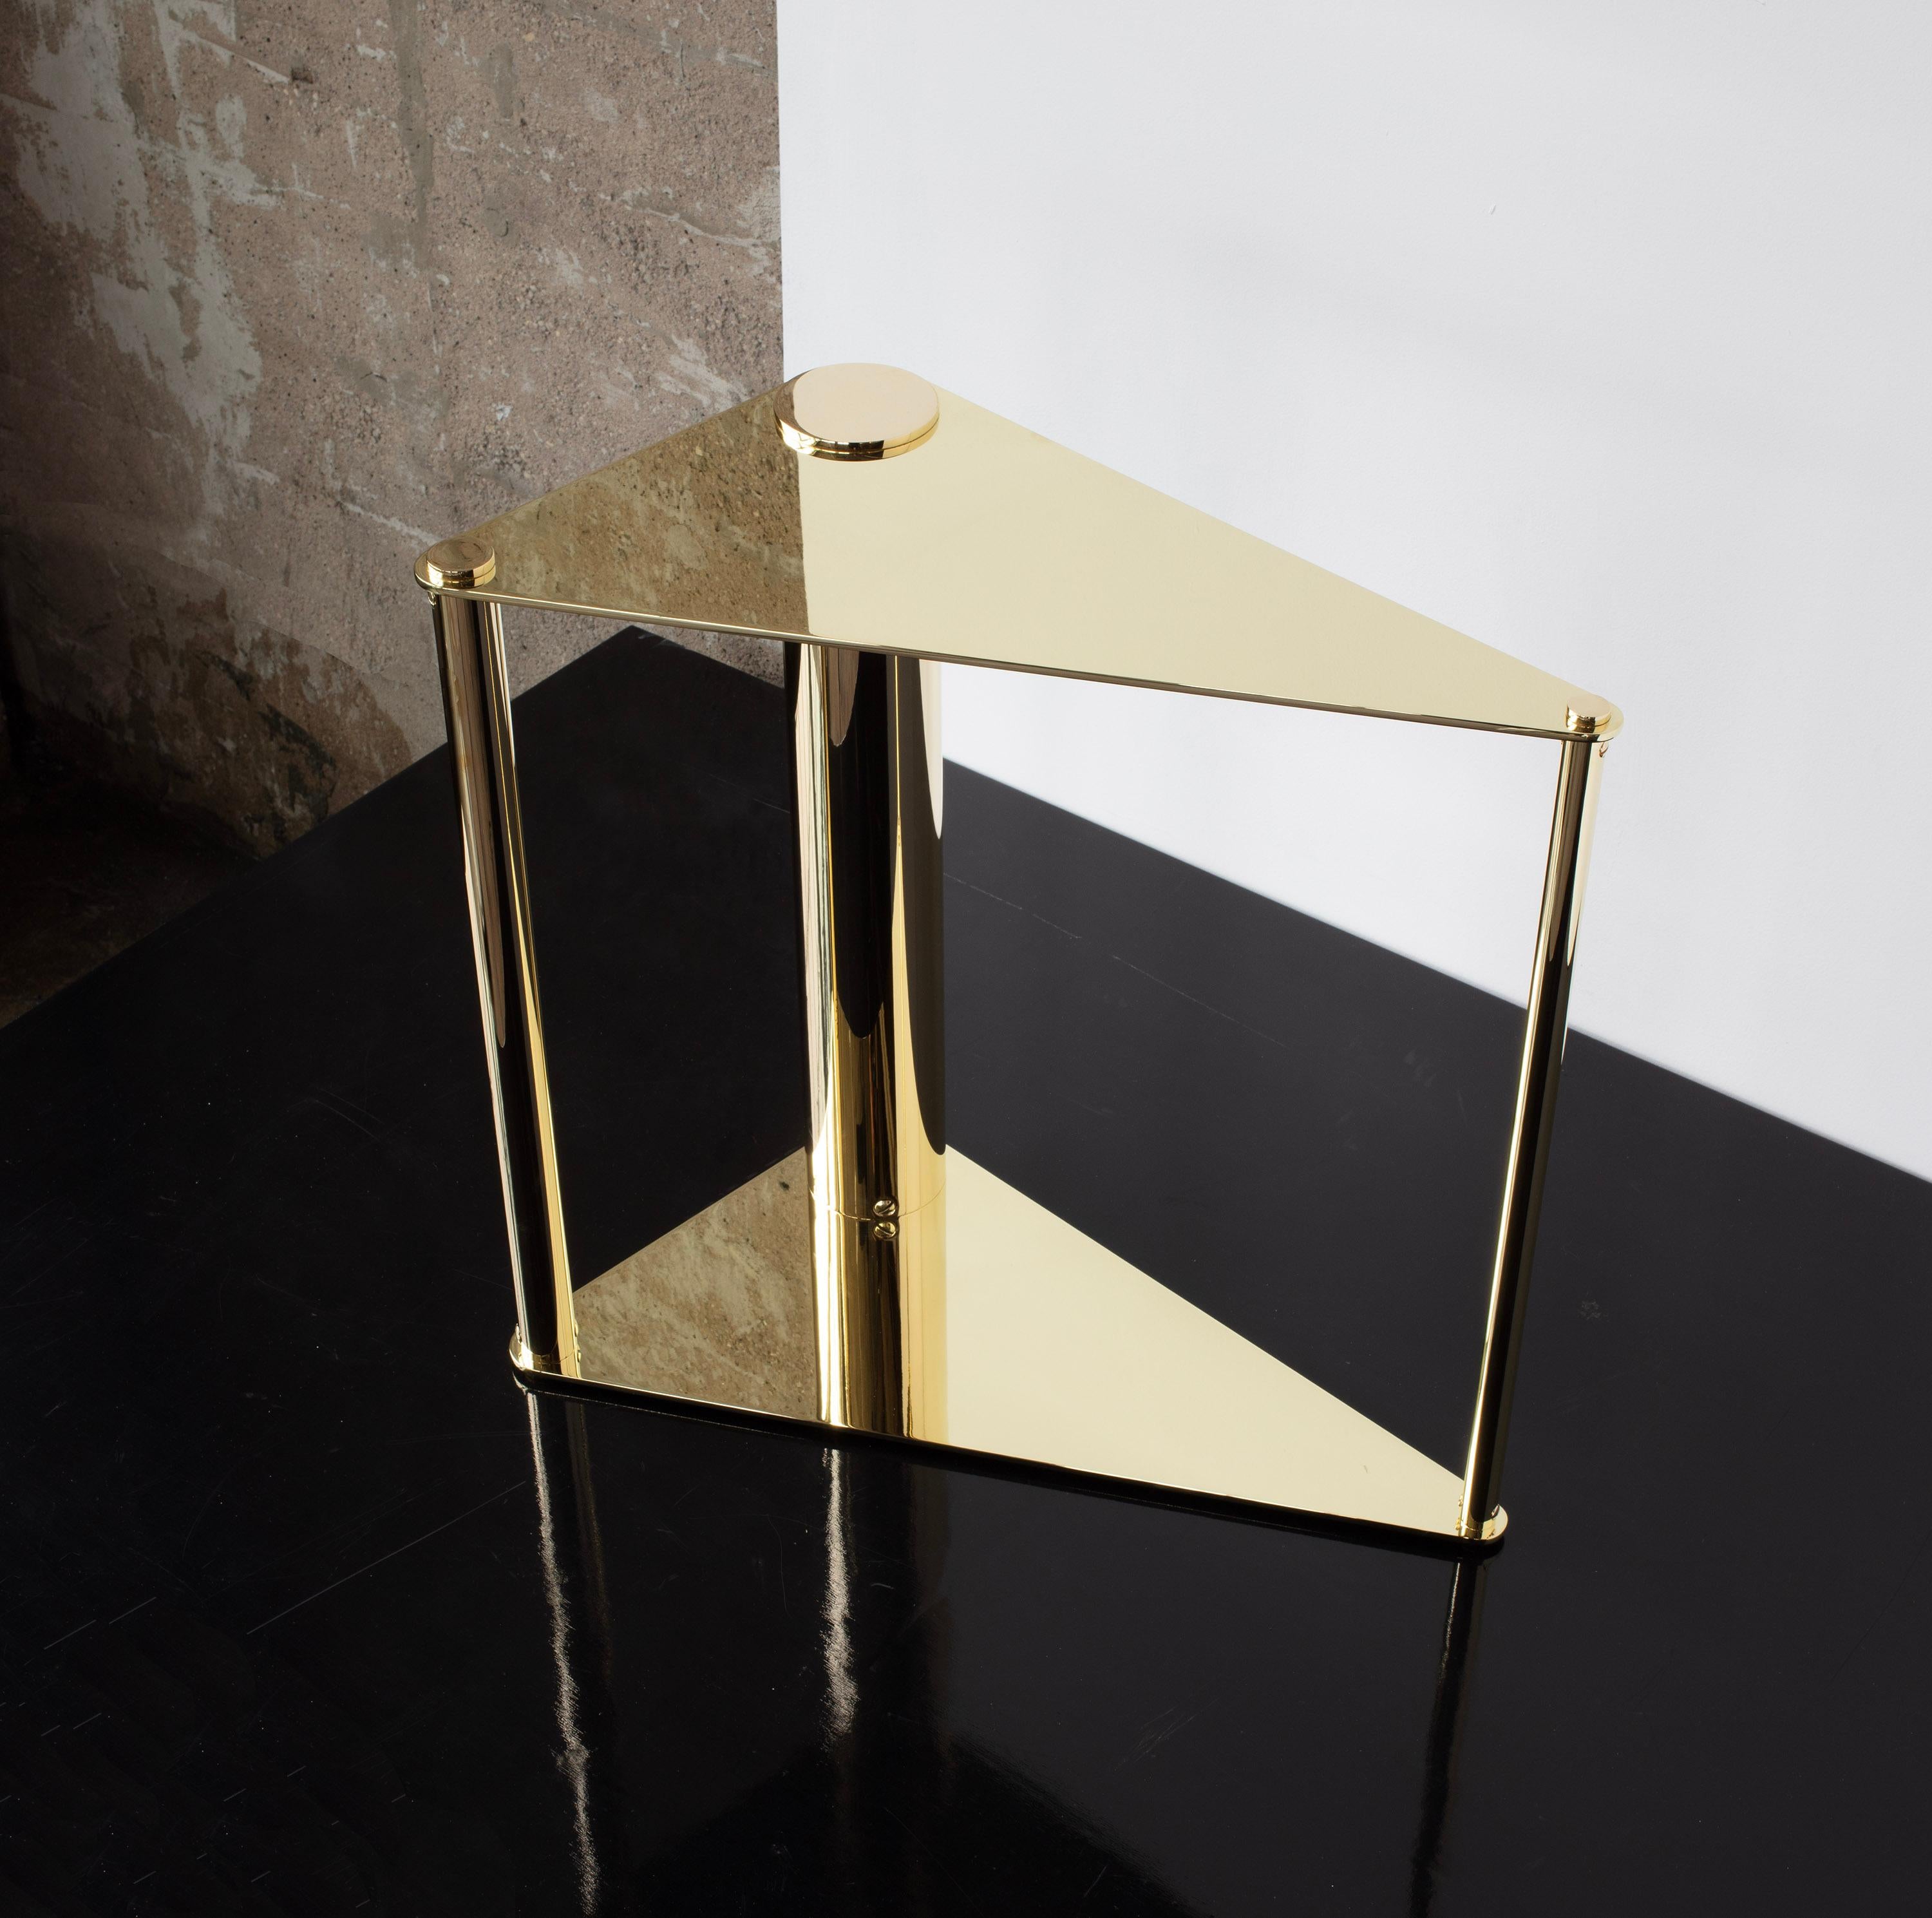 Bauhaus Untitled Side Table 3.0 Polished Brass Triangular Accent, End or Drink Tray For Sale